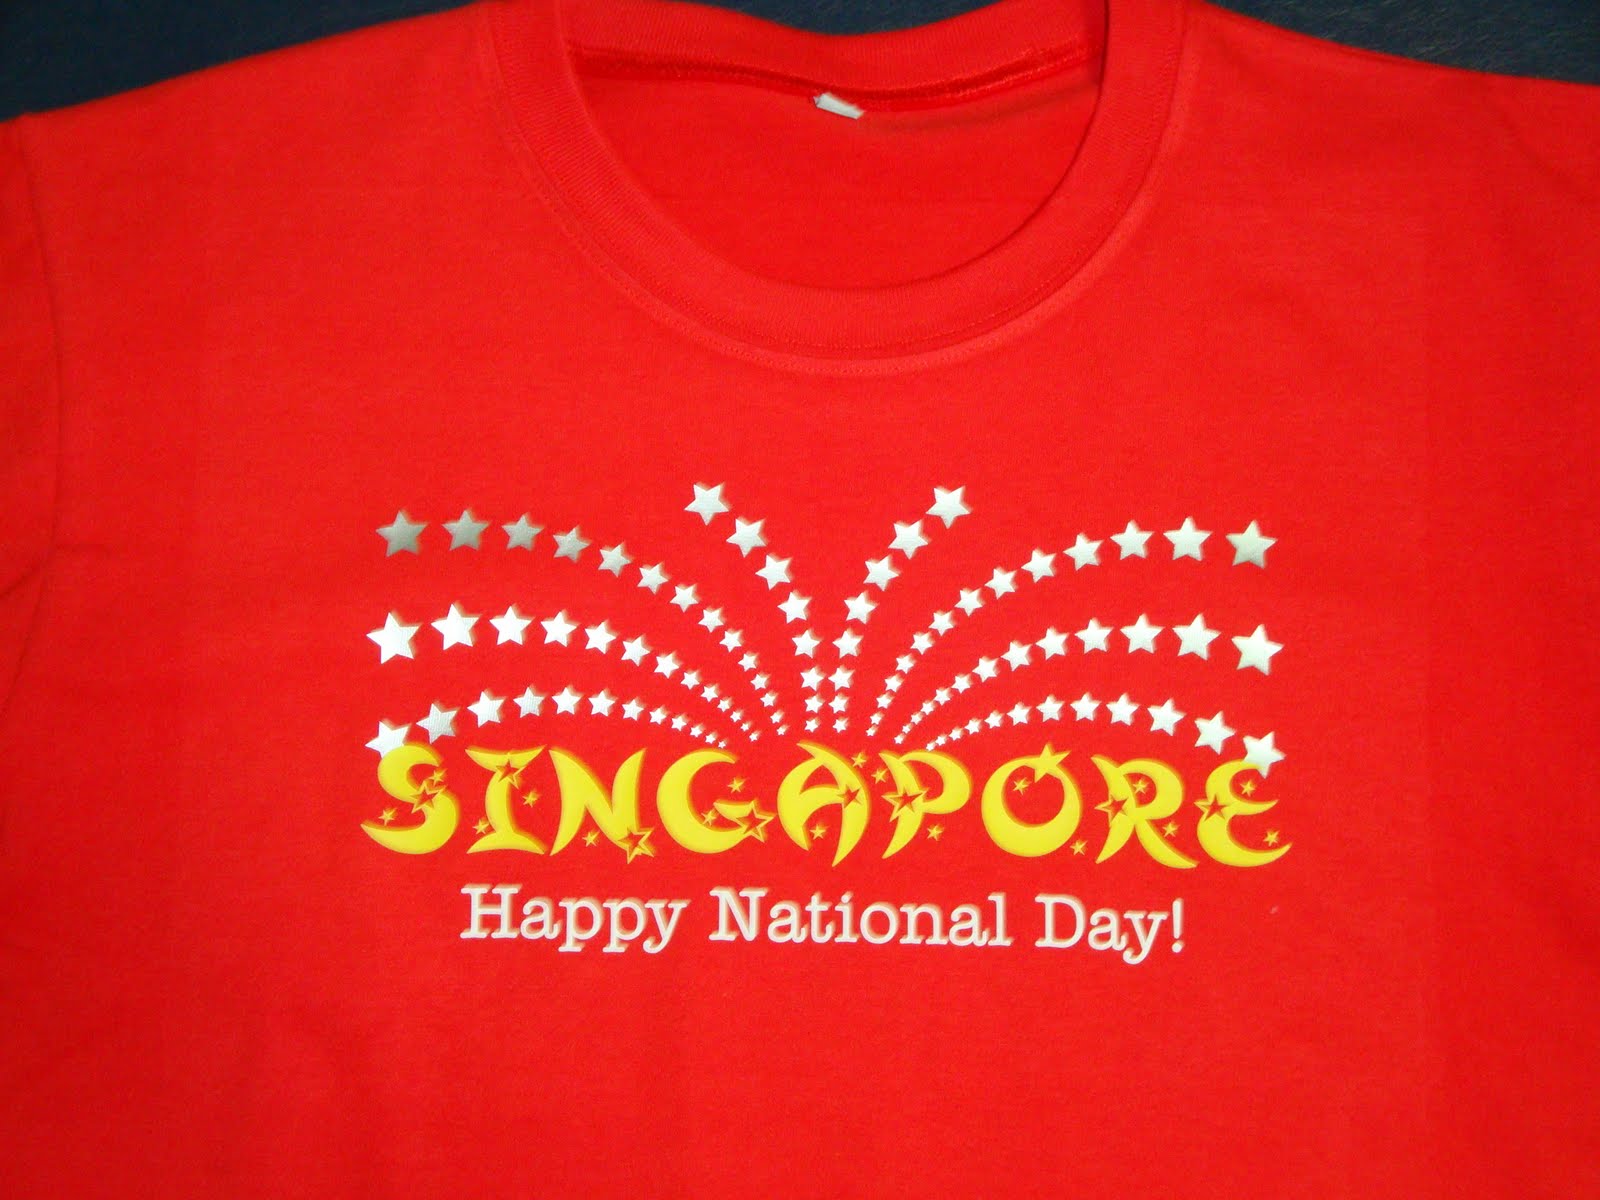  ... here s a design for singapore s national day stars are silver color